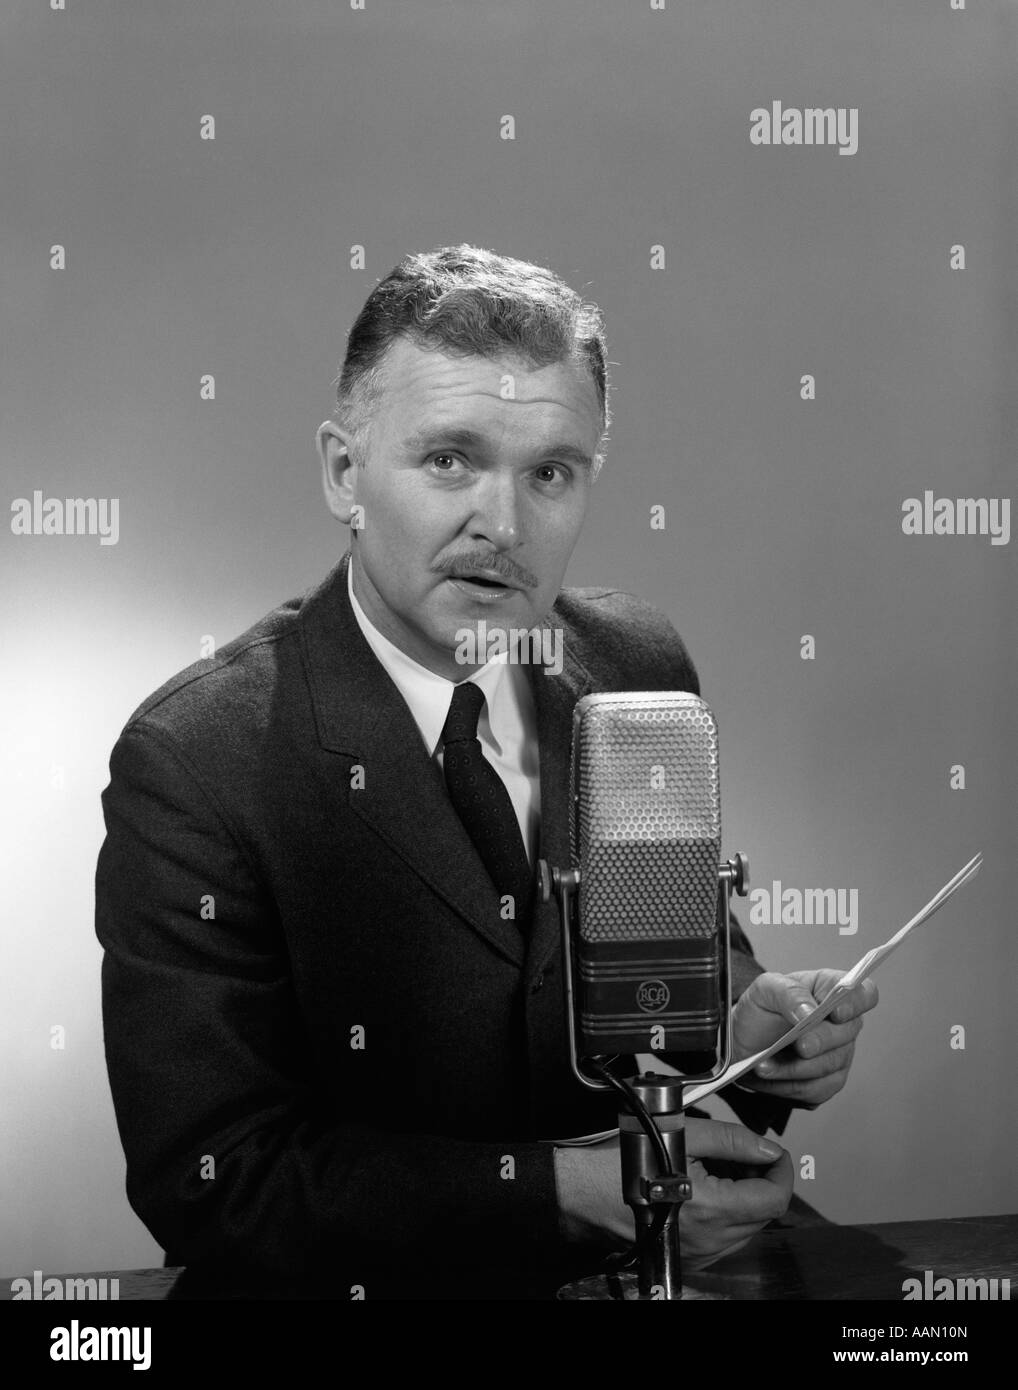 1950s 1960s OLDER MAN SPEAKING INTO MICROPHONE HOLDING PAPERS RADIO TELEVISION NEWSMAN REPORTER ANNOUNCER Stock Photo